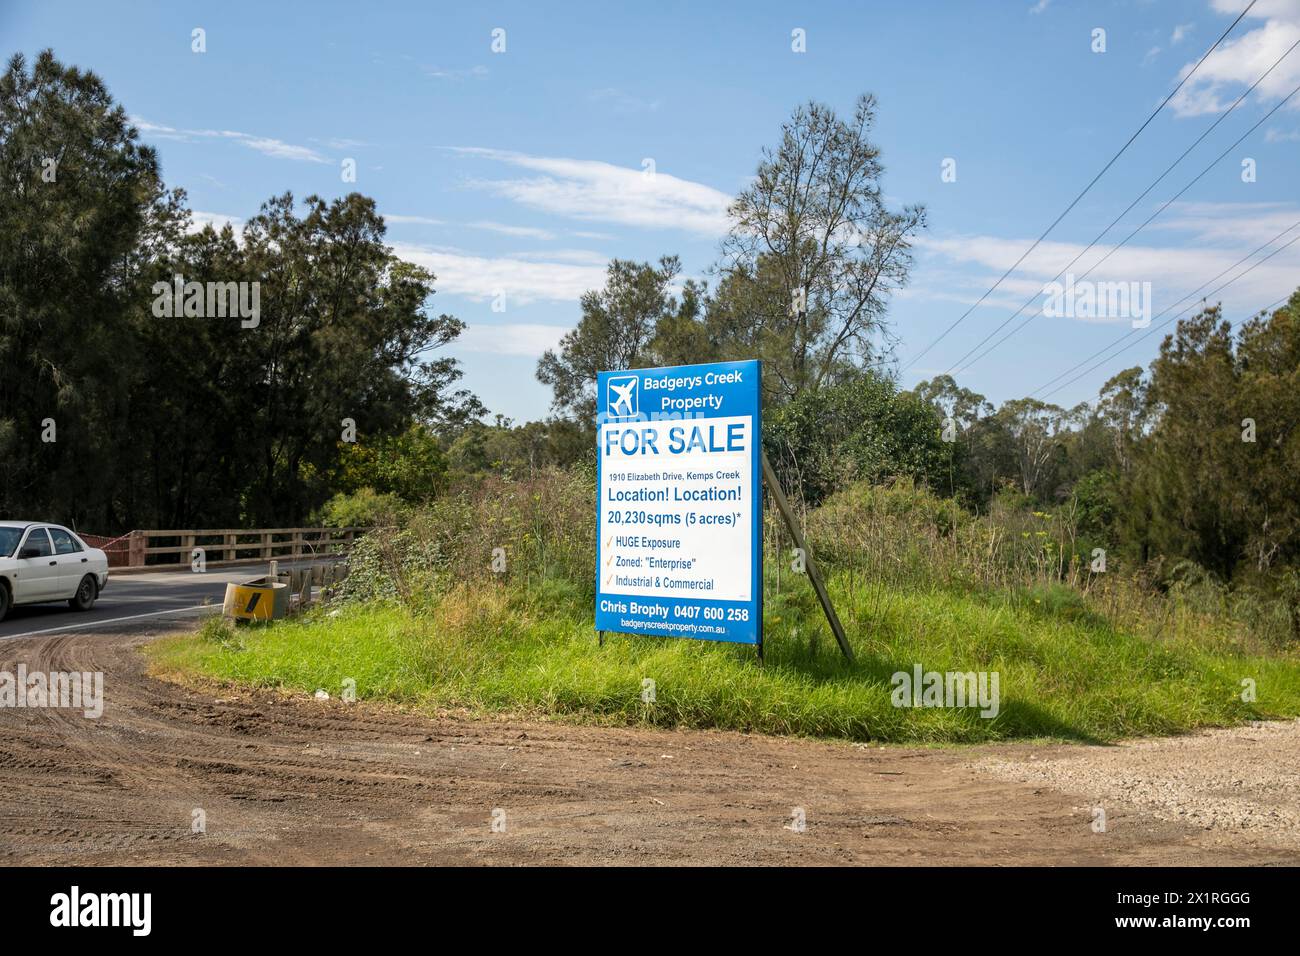 Greater Western Sydney region, Badgerys Creek Property agent advertising 5 acres of land for sale between Badgerys Creek and Luddenham, near airport Stock Photo